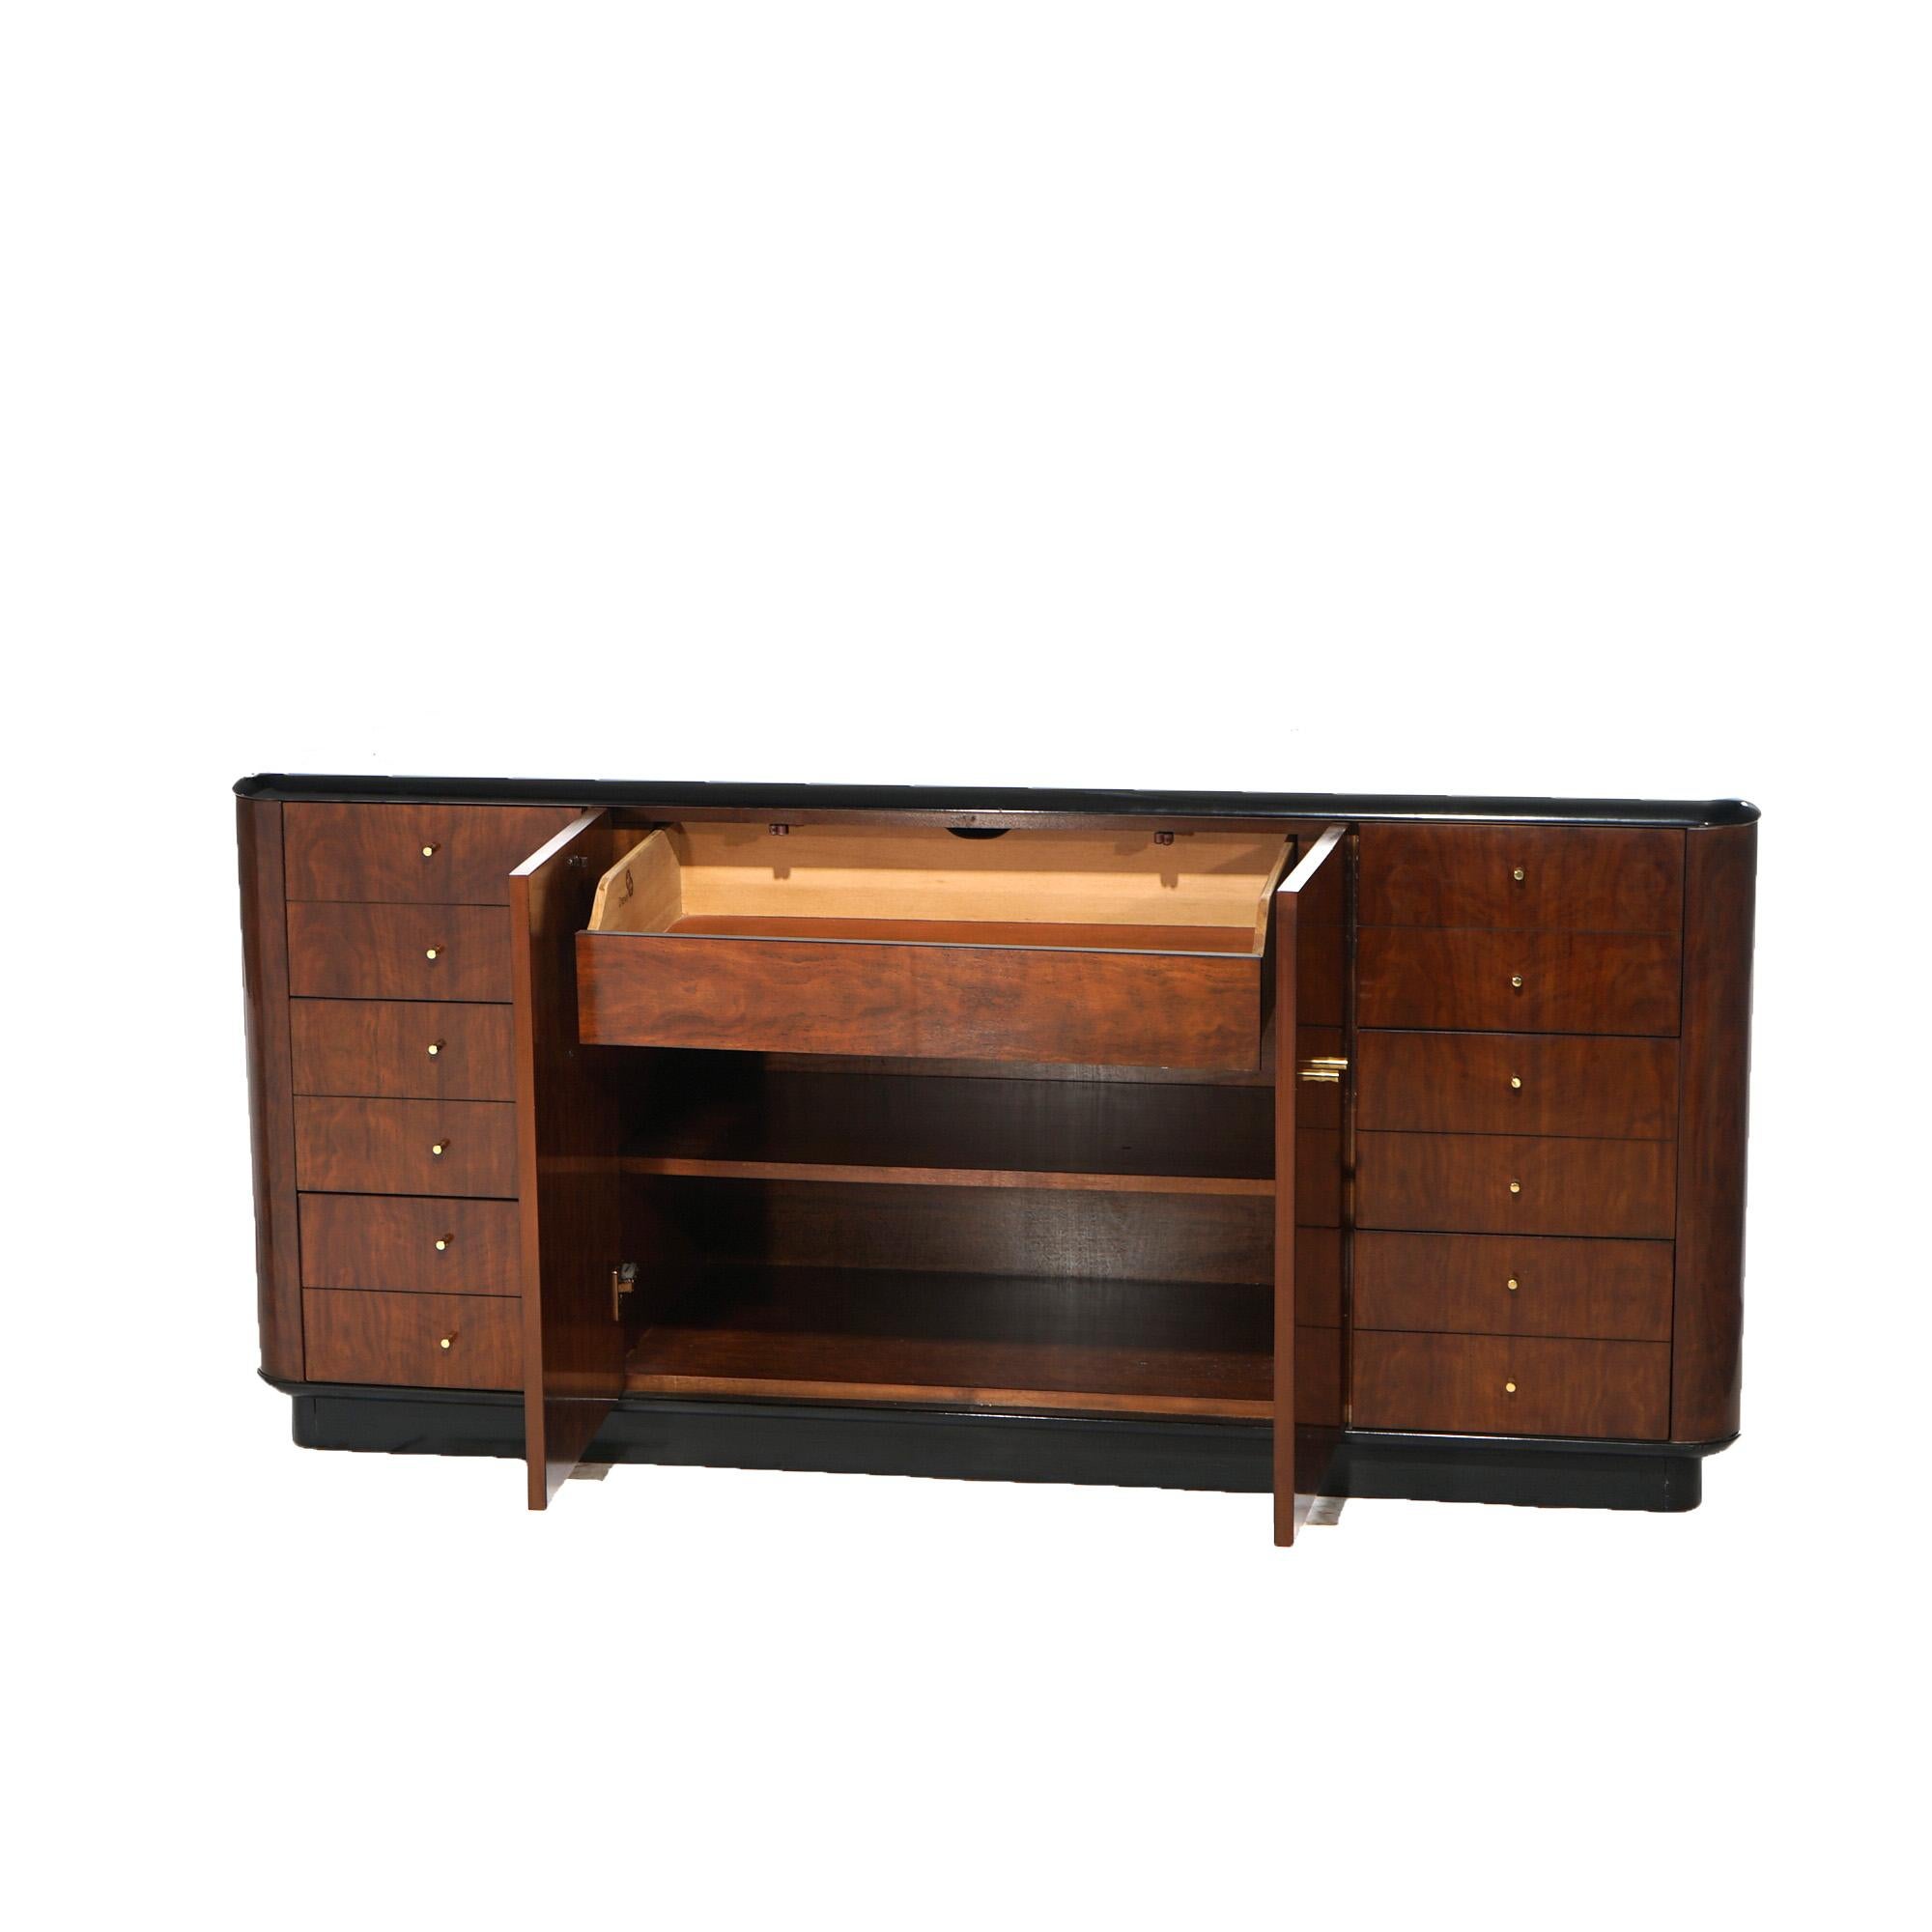 A Mid Century Modern sideboard dresser by Drexel in the Profiles line offers mahogany construction with ebonized top over case with central double door cabinet and having flanking drawer towers, raised on an ebonized base, maker mark as